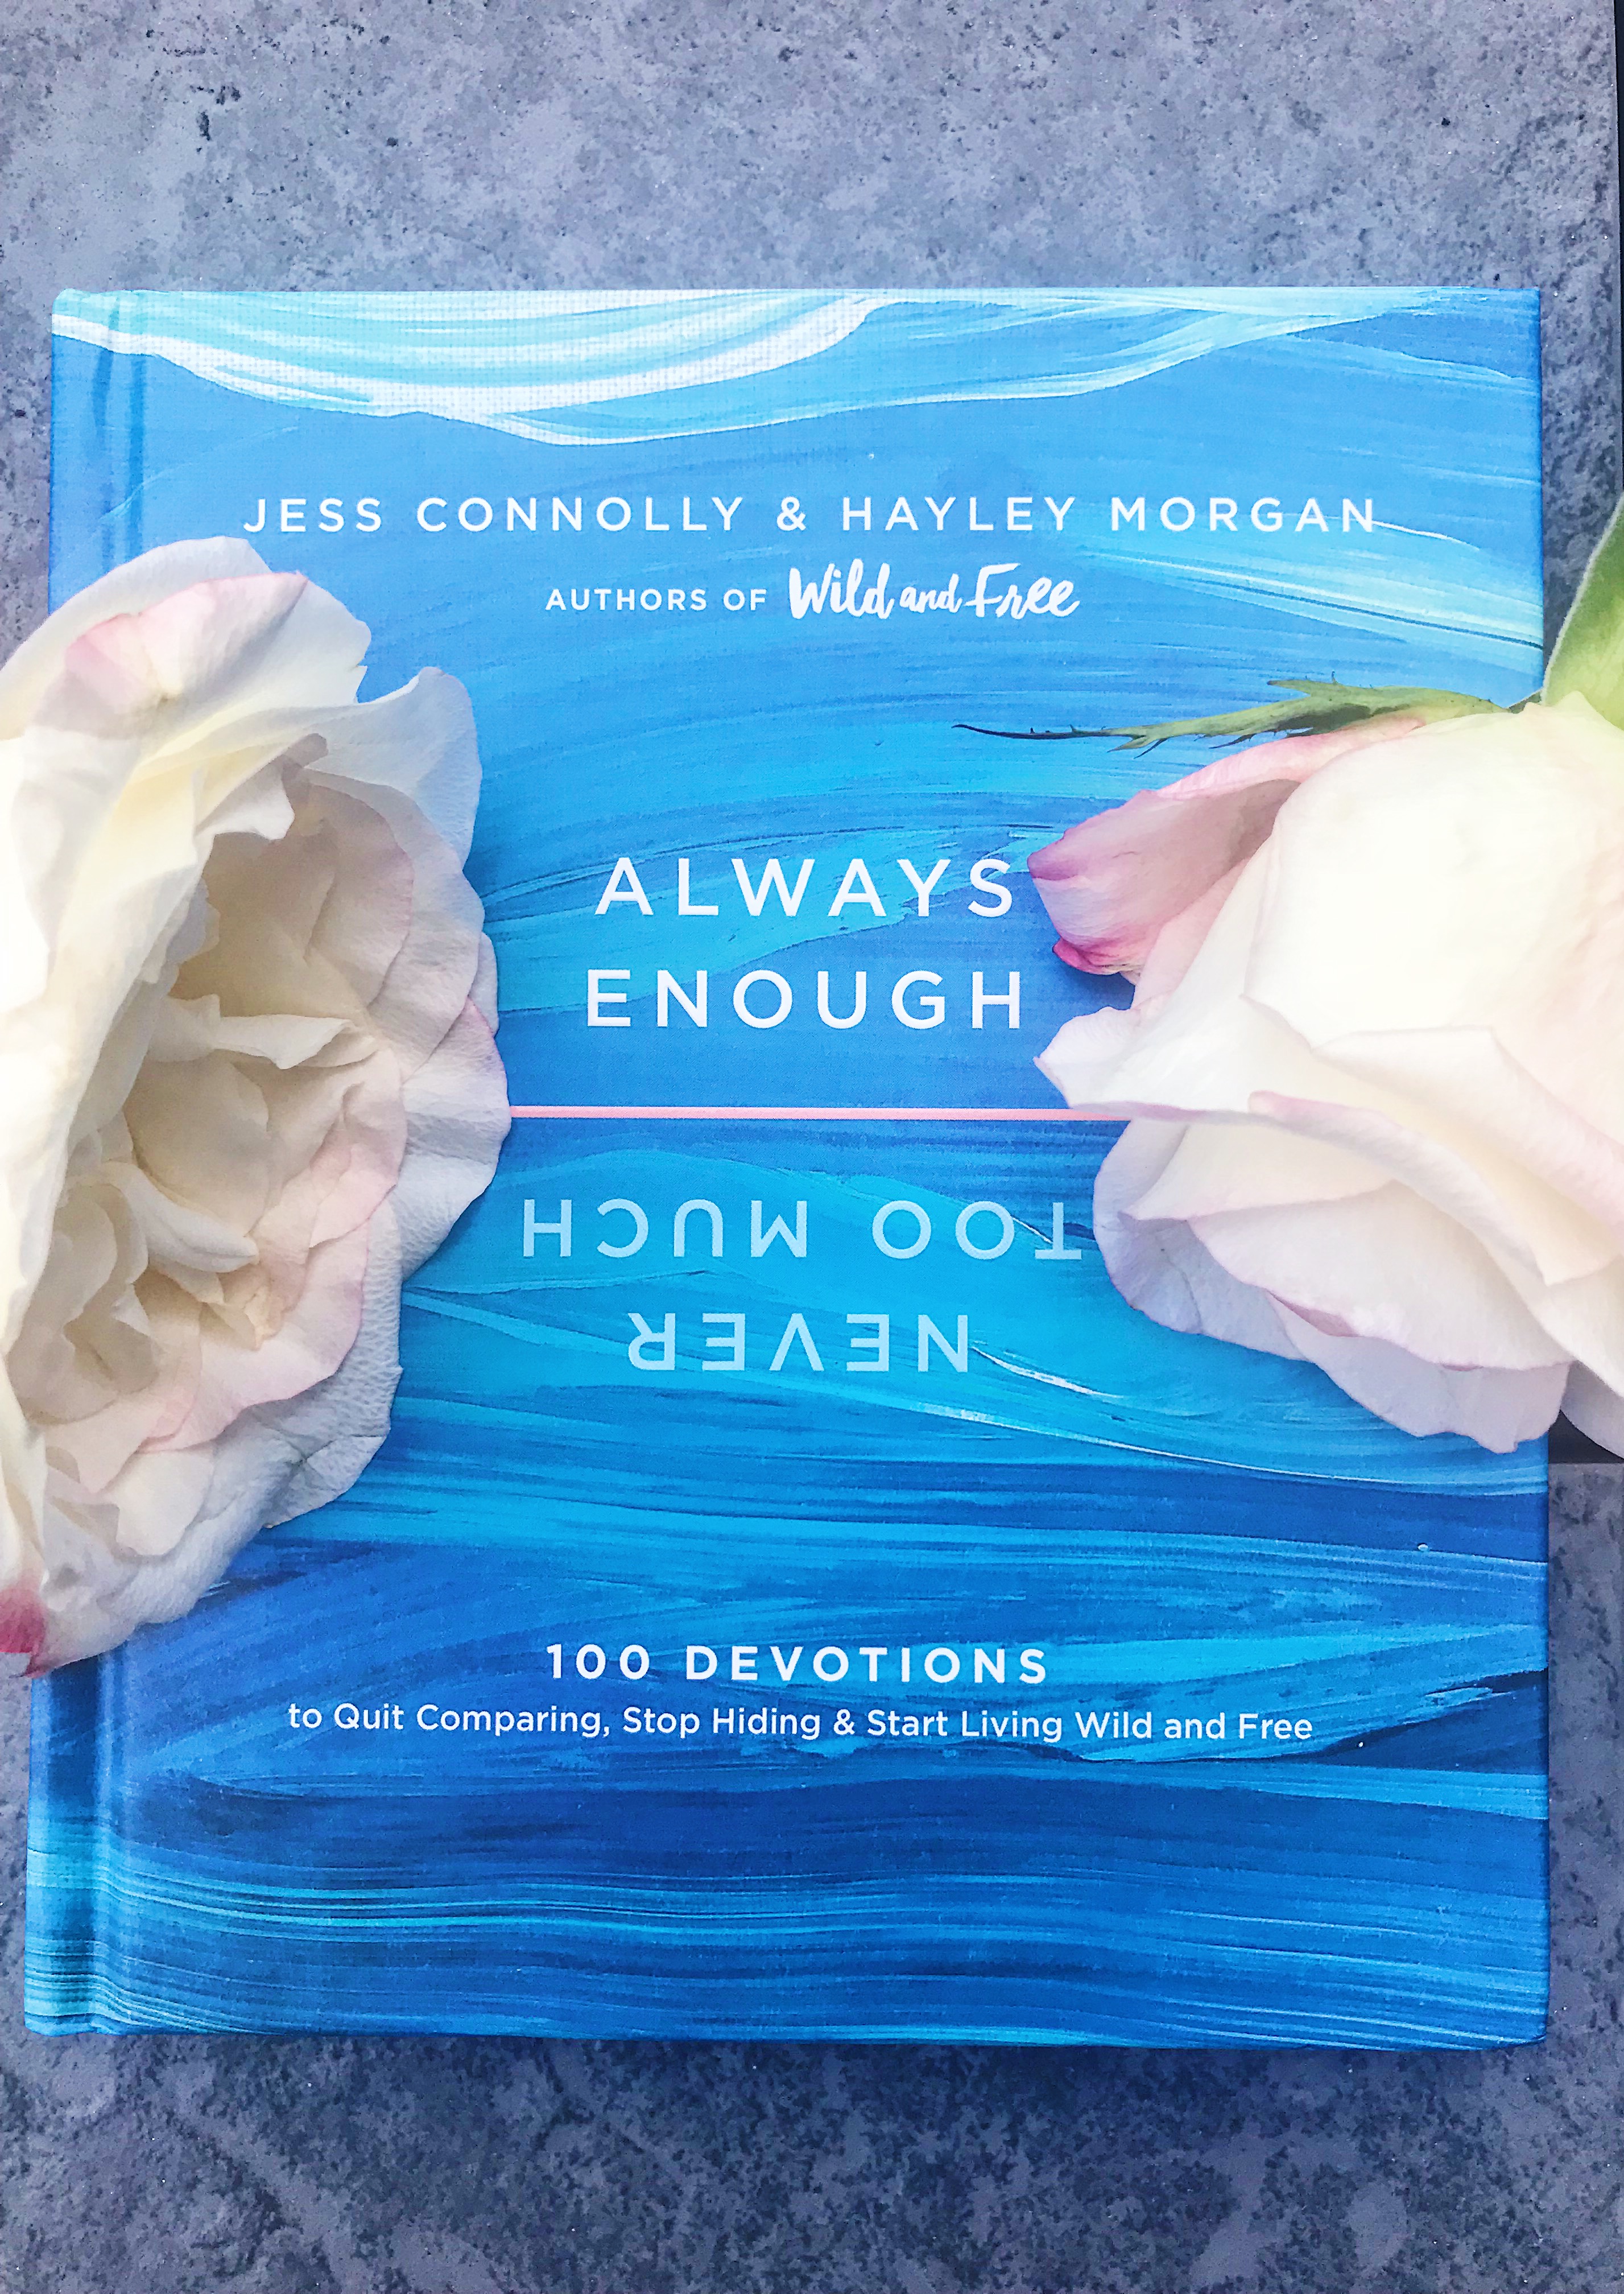 Authors Hayley Morgan and Jess Connolly co-wrote this book and 'Wild and Free'. 'Always Enough, Never Too Much' holds 100 devotions. 'Always Enough, Never Too Much' devotional